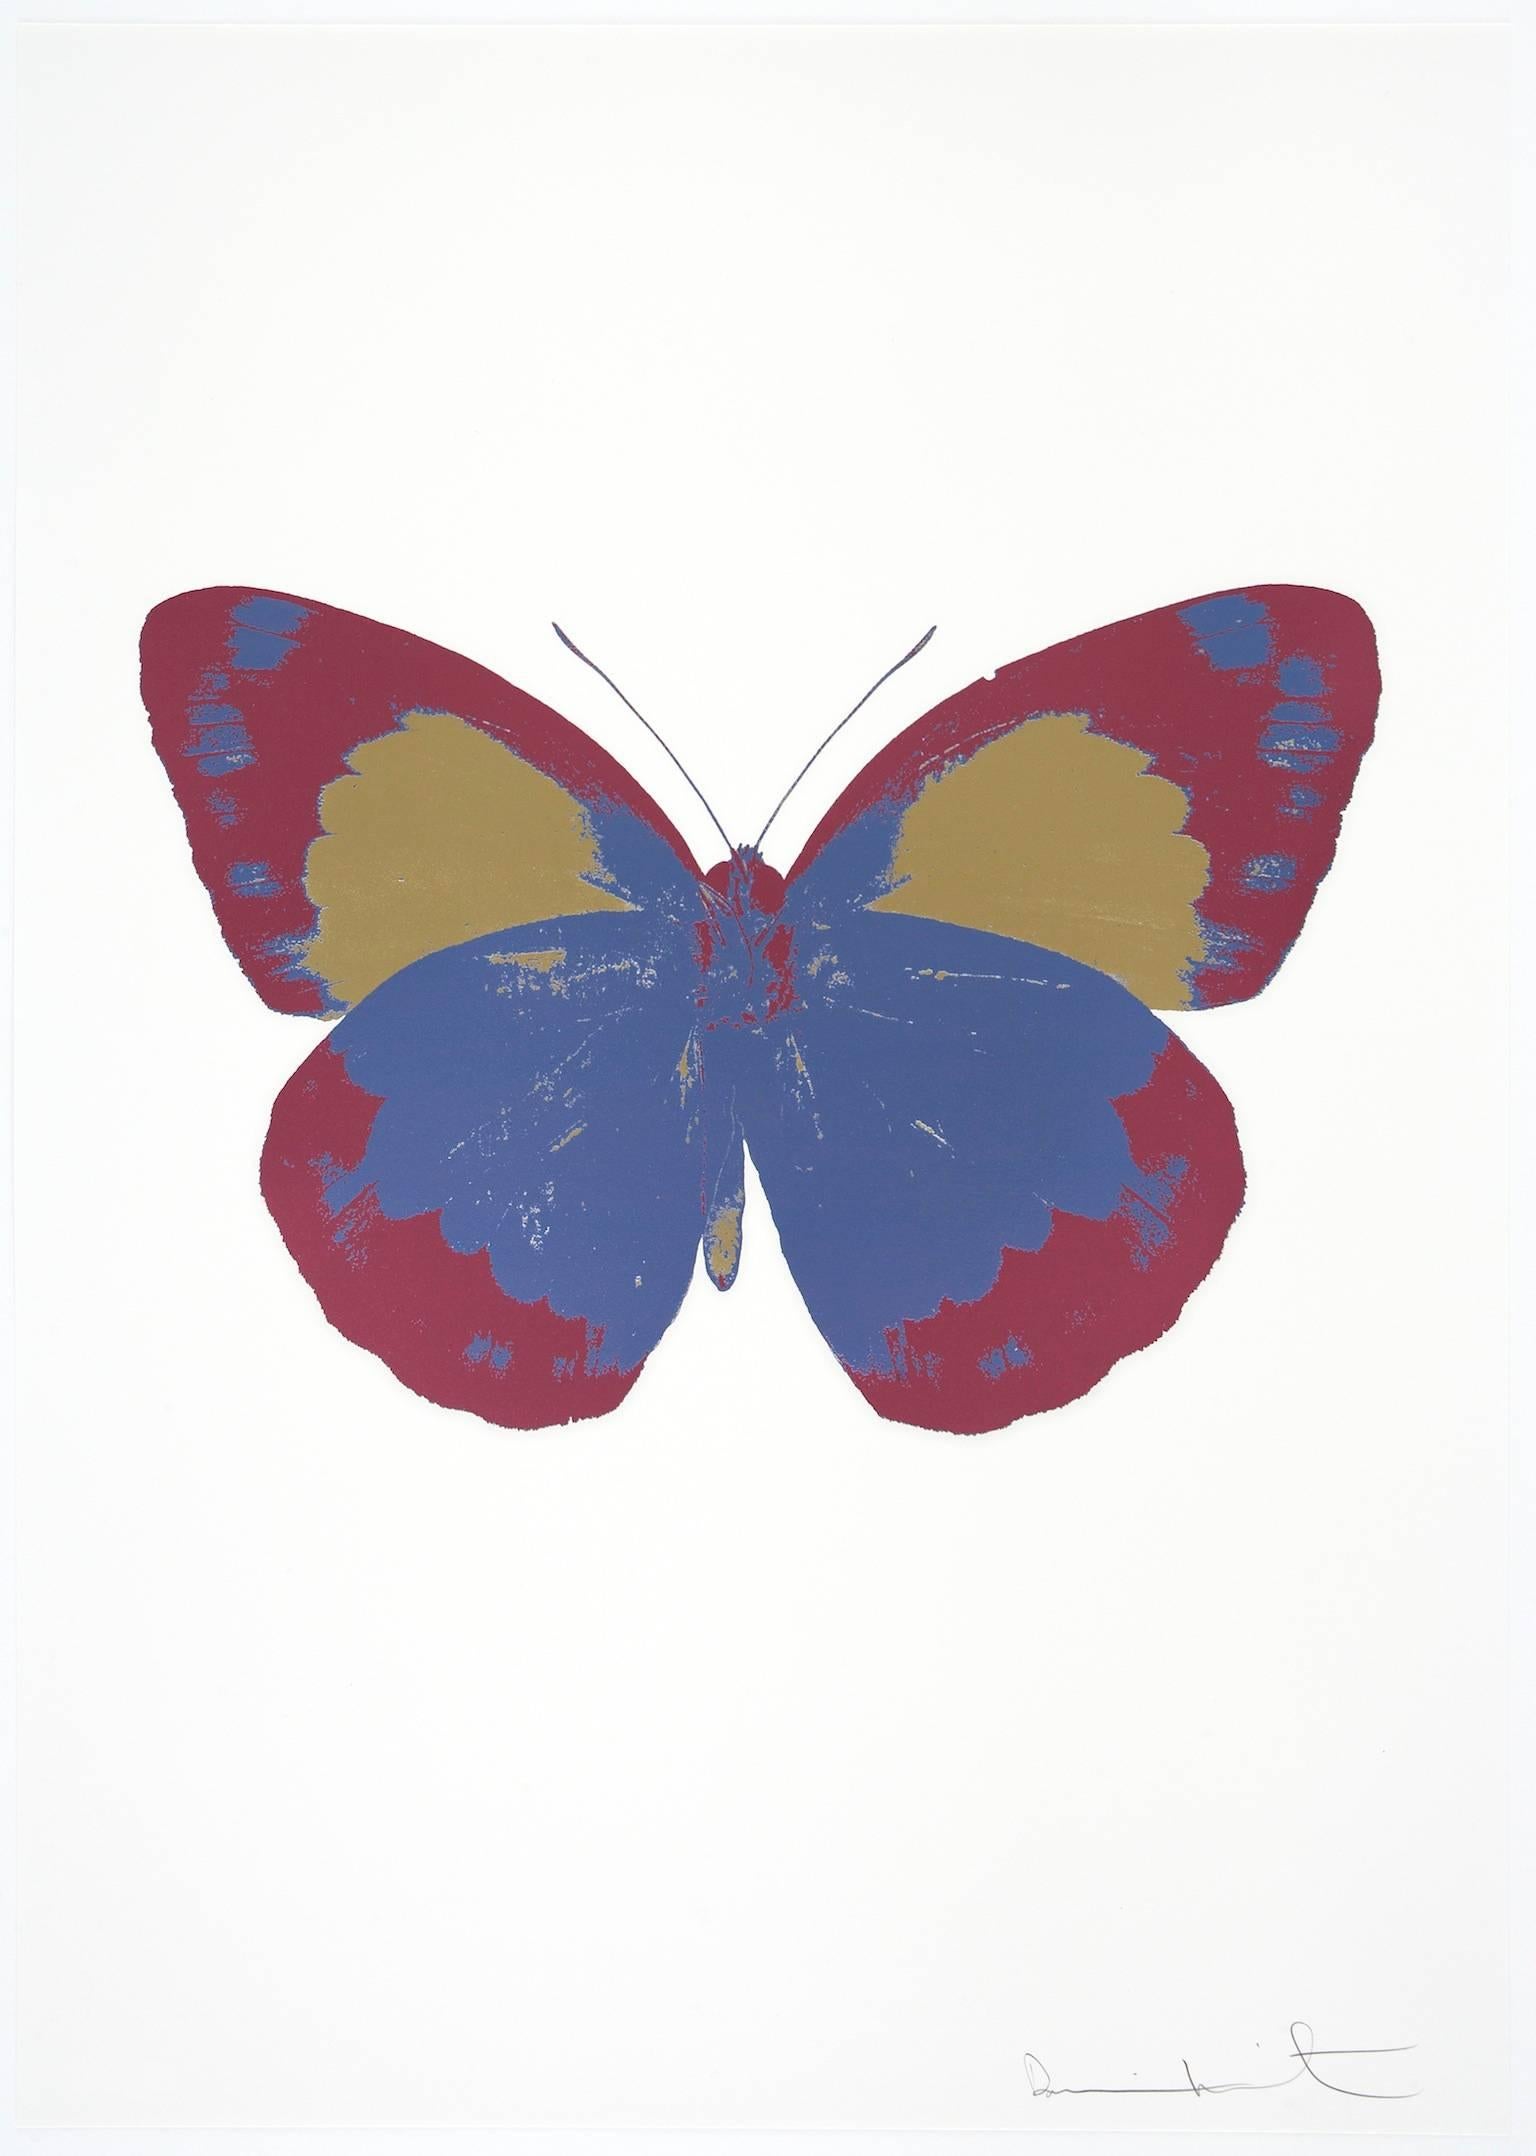 The Souls II - Cornflower Blue - Loganberry Pink - Cool Gold - Print by Damien Hirst